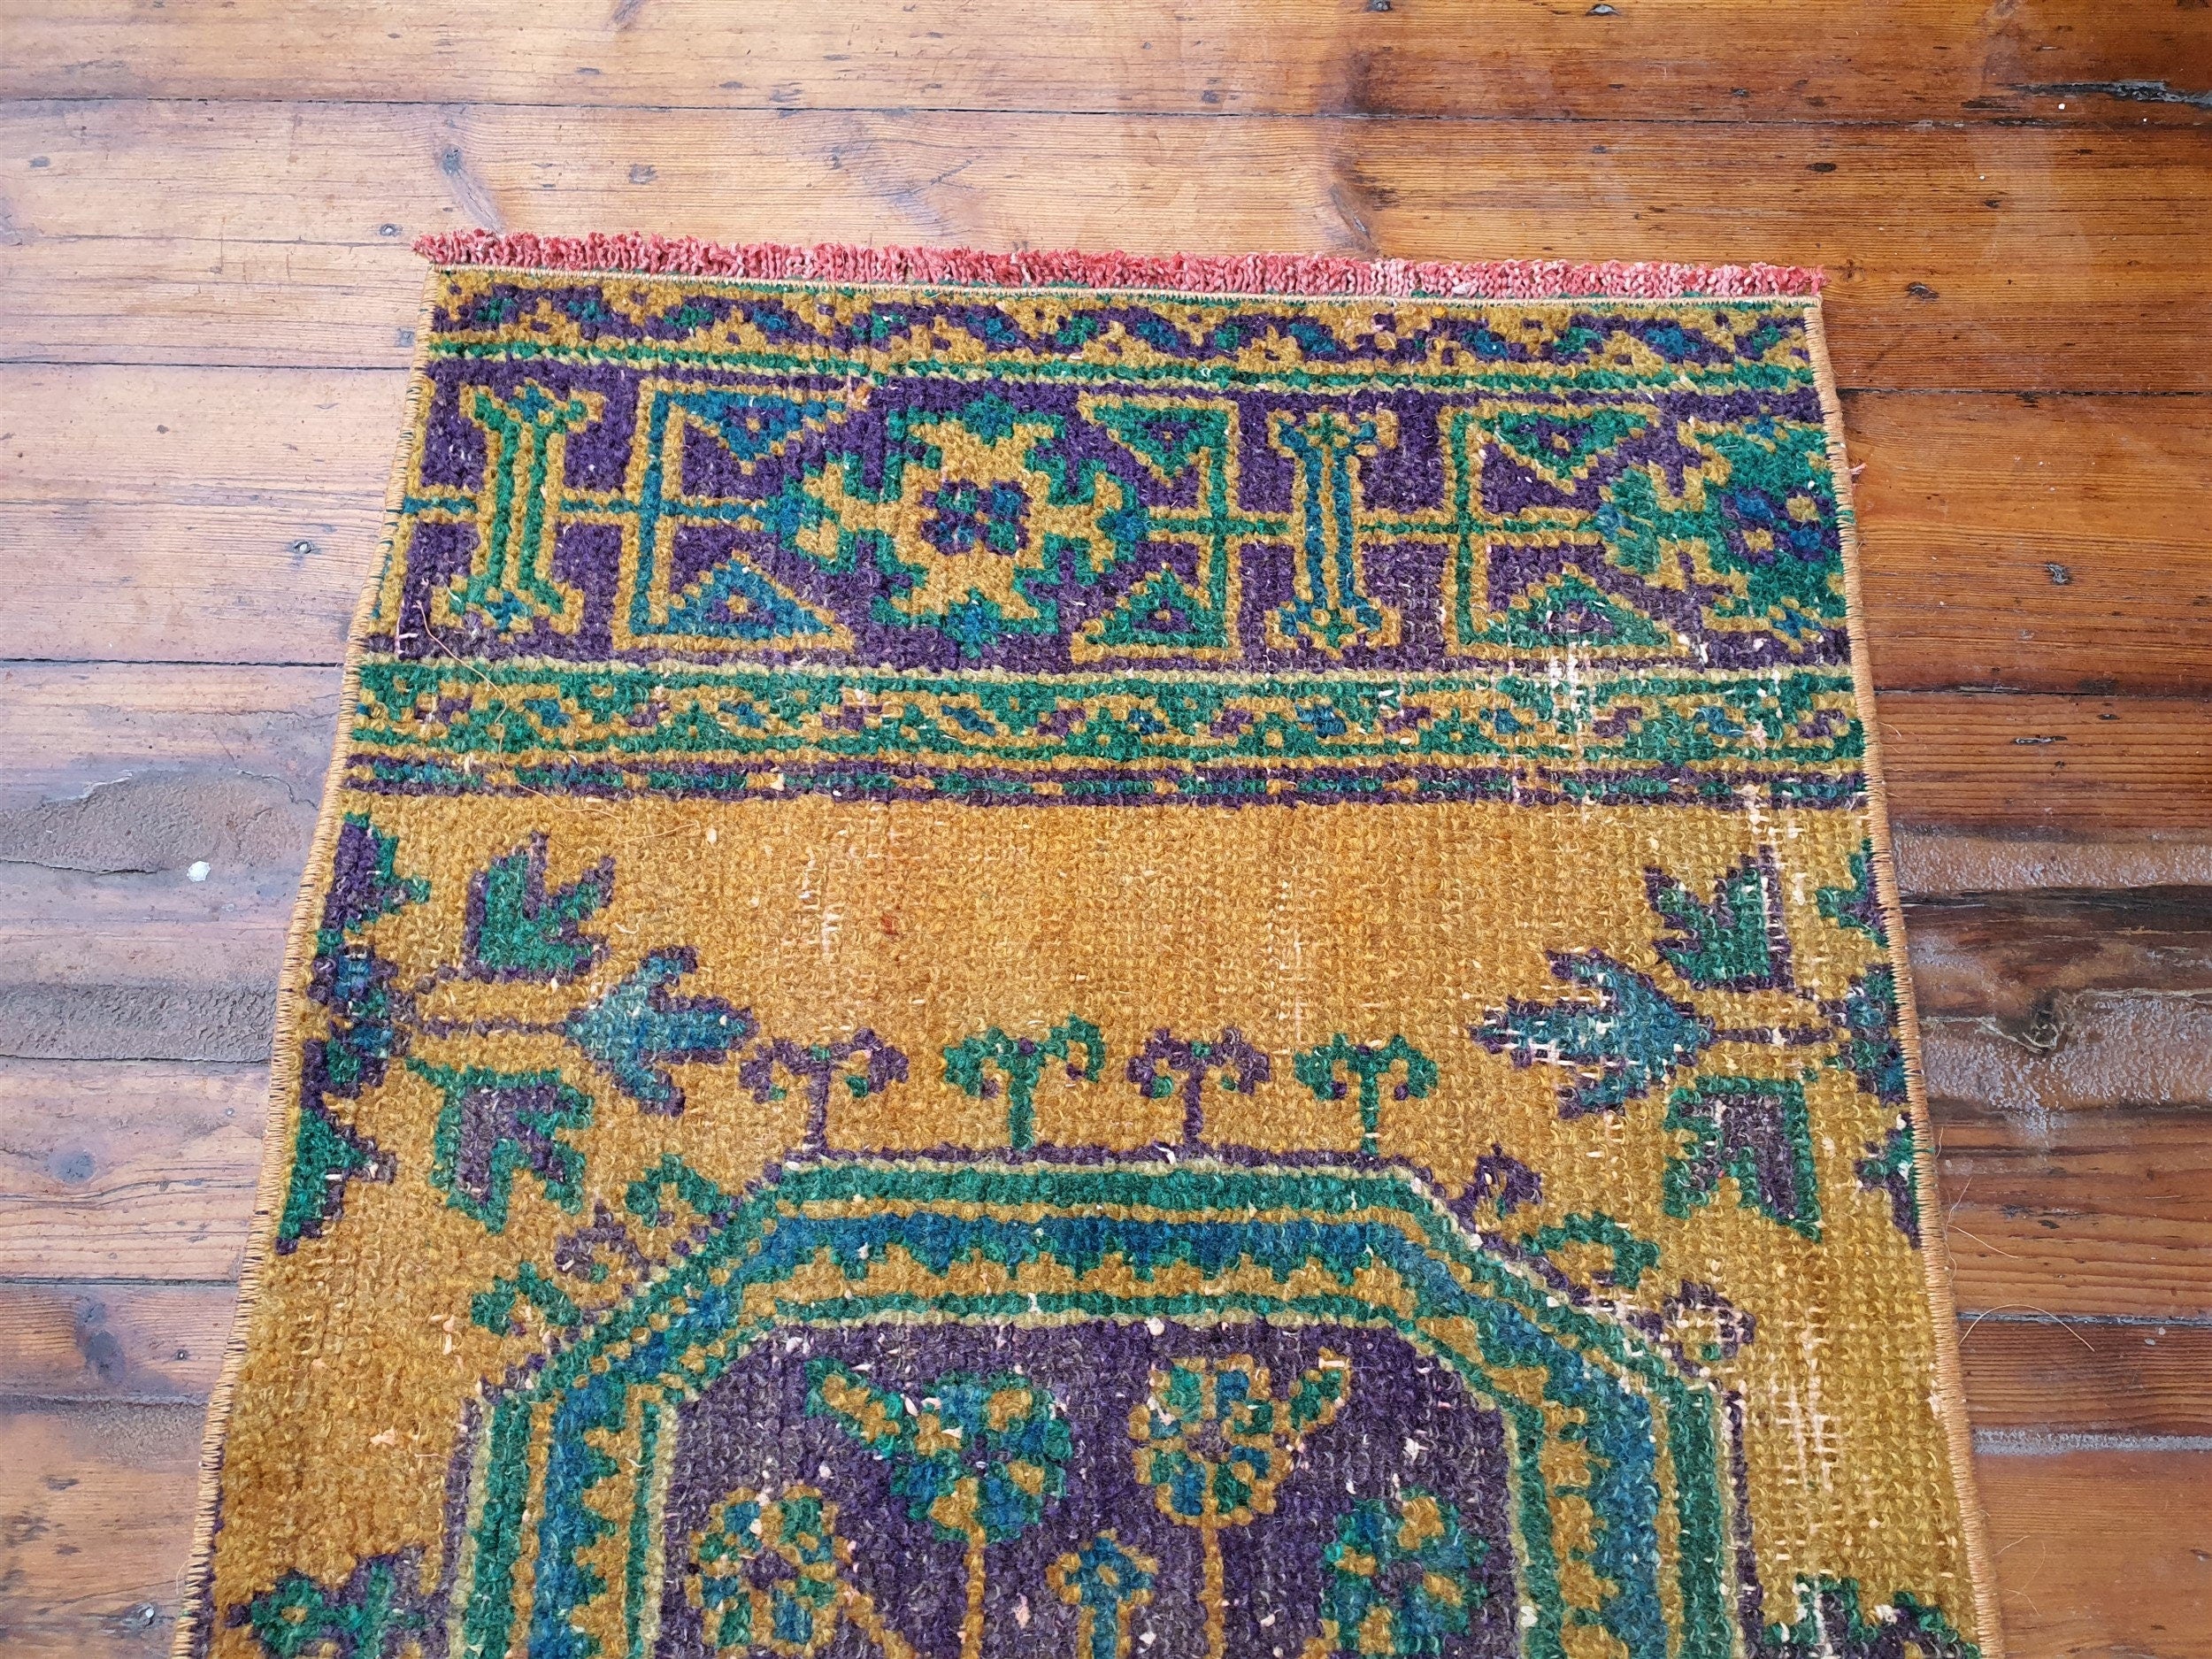 Small Turkish Rug, 4 ft 4 in x 2 ft, Apricot Orange and Teal Green Vintage Faded Distressed Door Mat